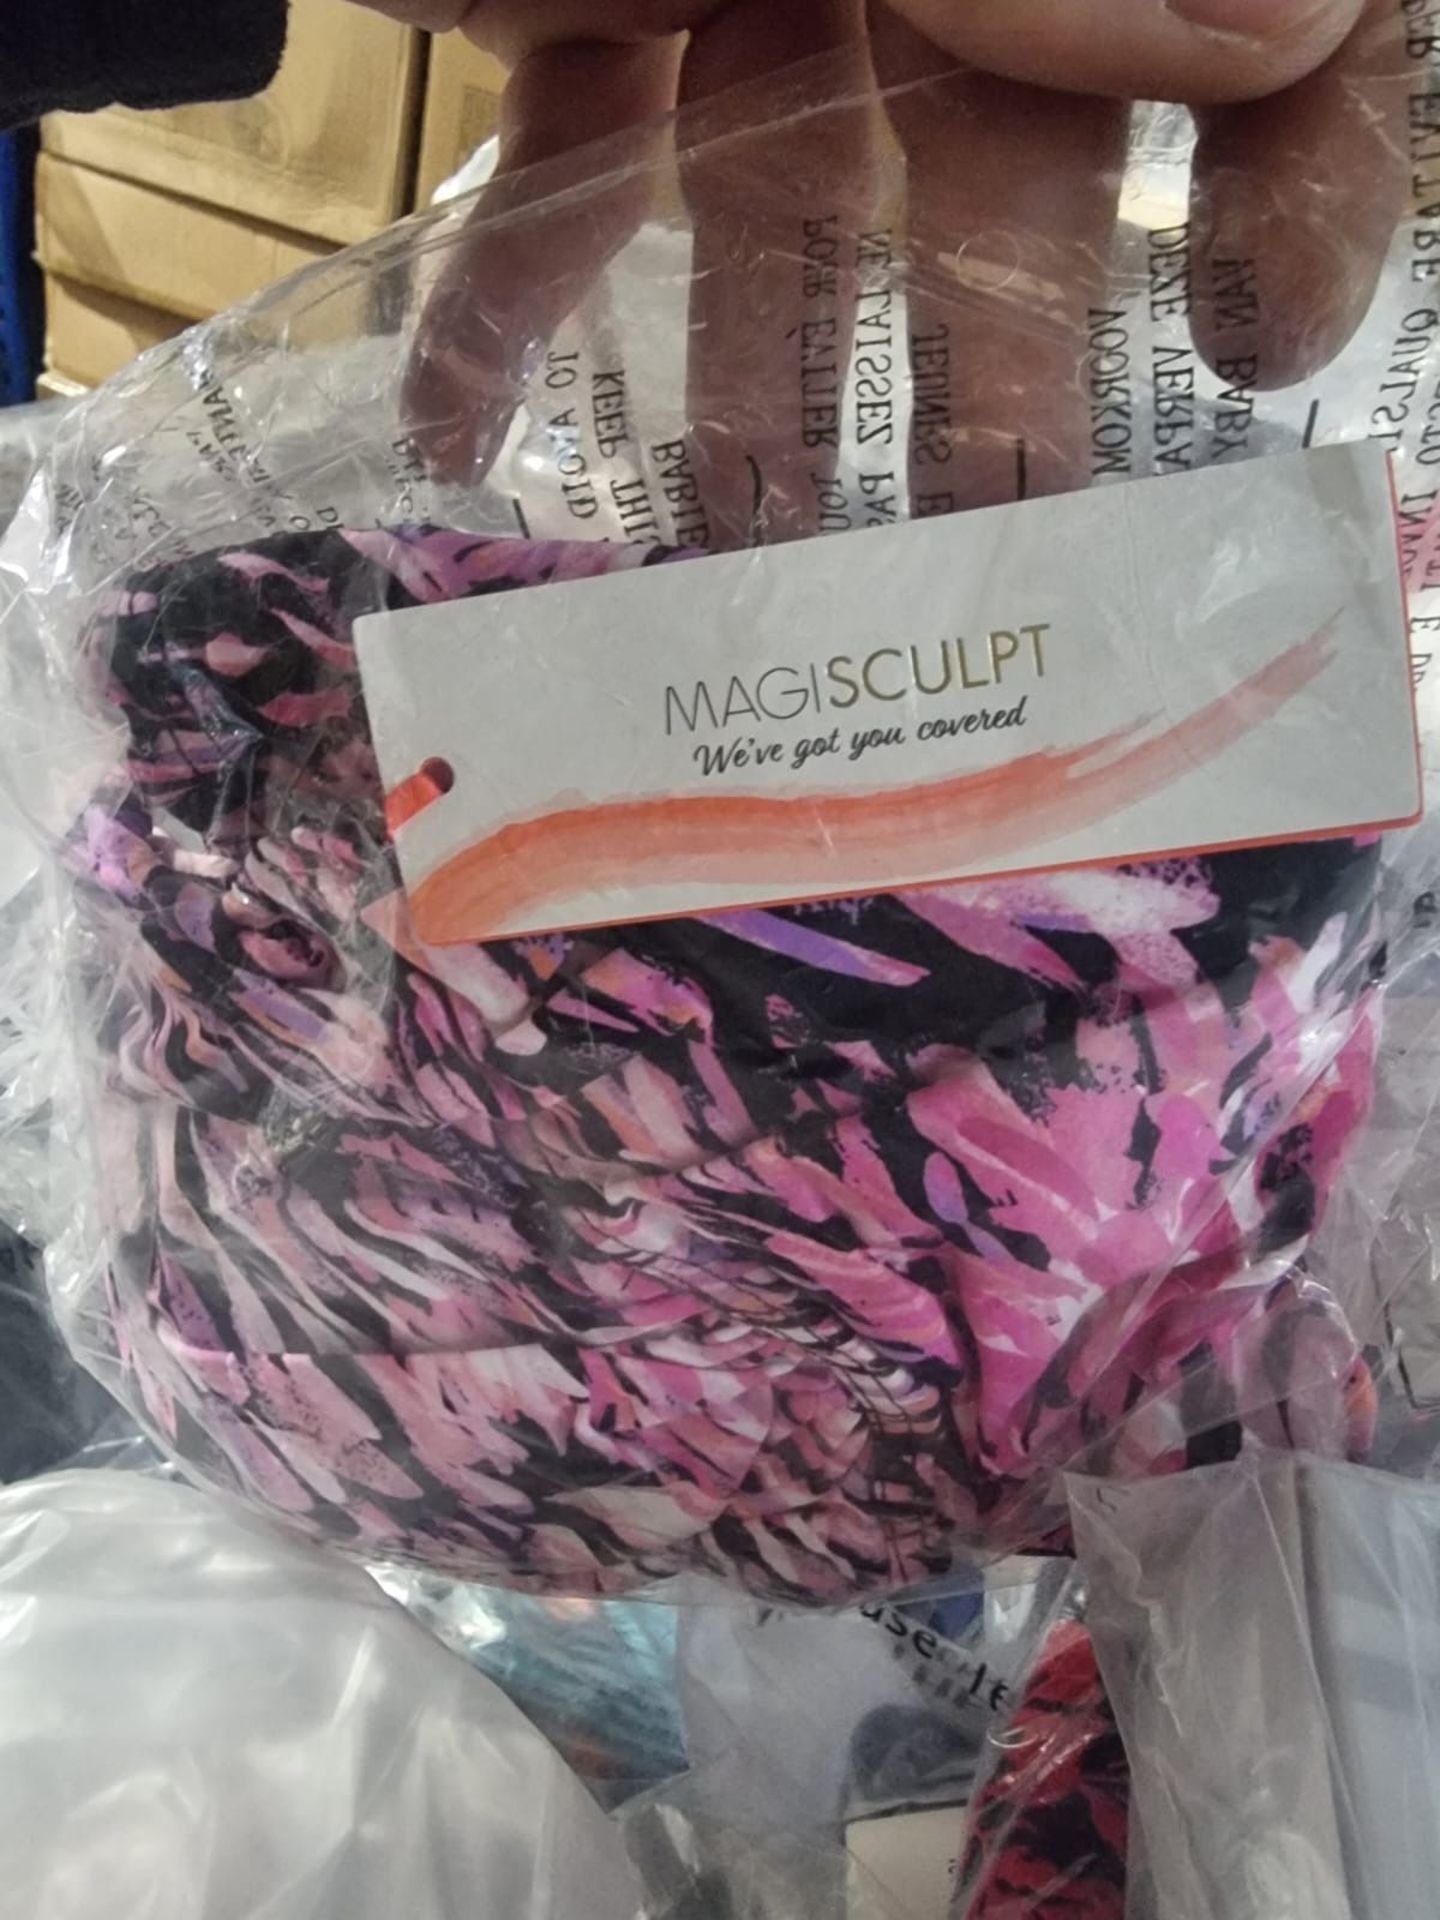 100 x NEW PACKAGED ASSORTED SWIM & UNDERWEAR FROM BRAND SUCH AS WONDERBRA, BOUX AVENUE, ANN SUMMERS, - Image 5 of 53